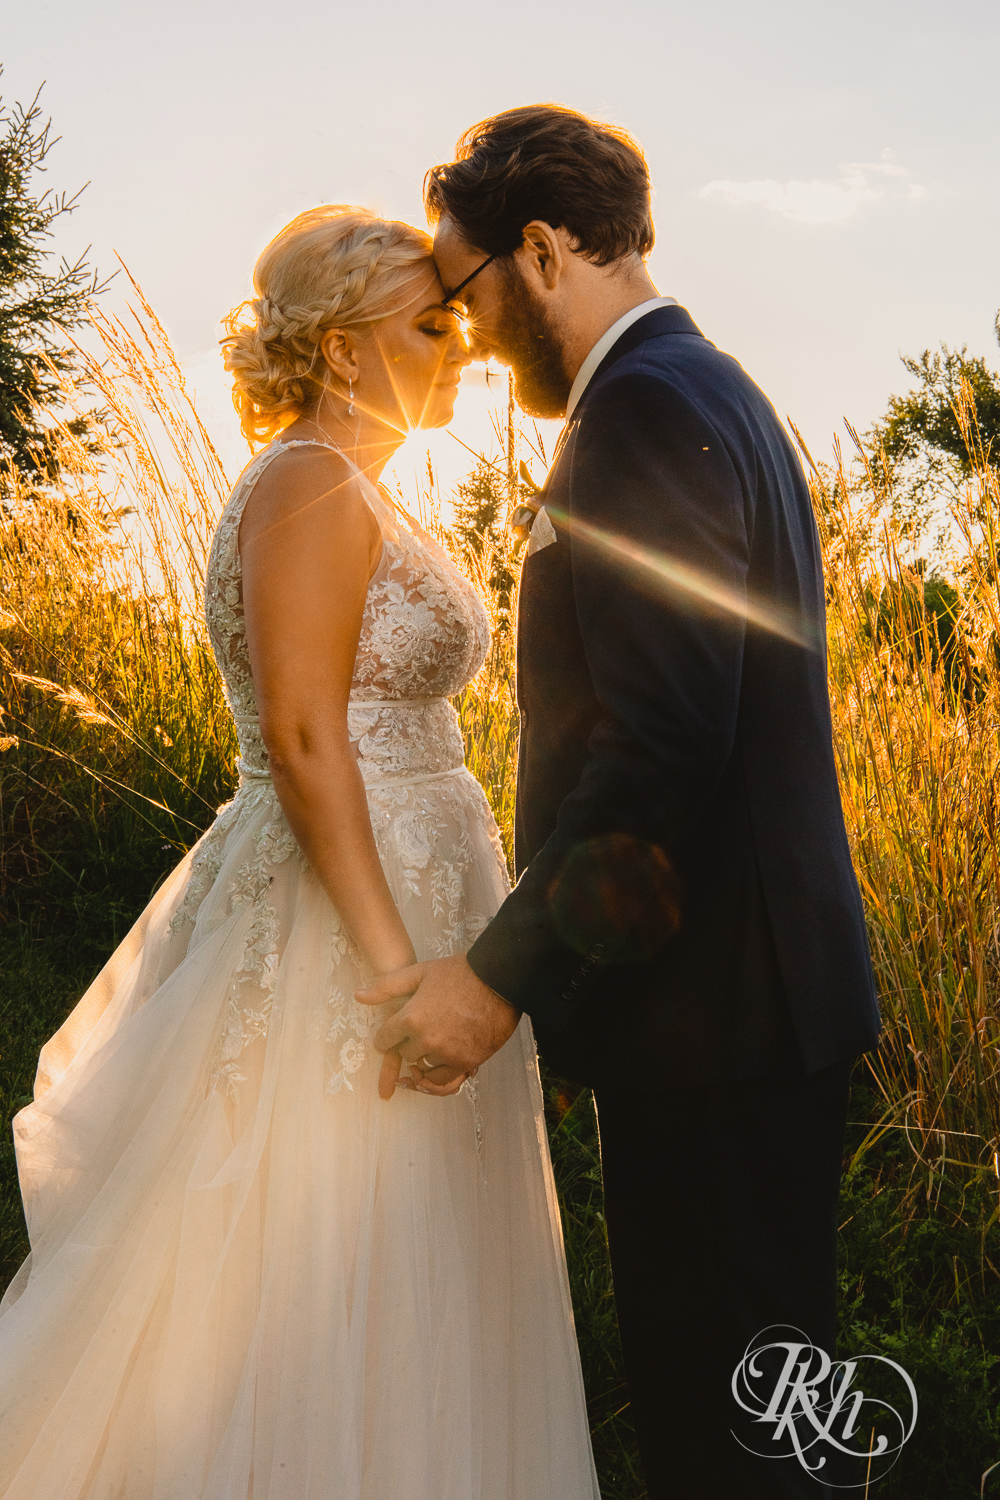 Bride and groom heads together at sunset at Green Acres Event Center in Eden Prairie, Minnesota.